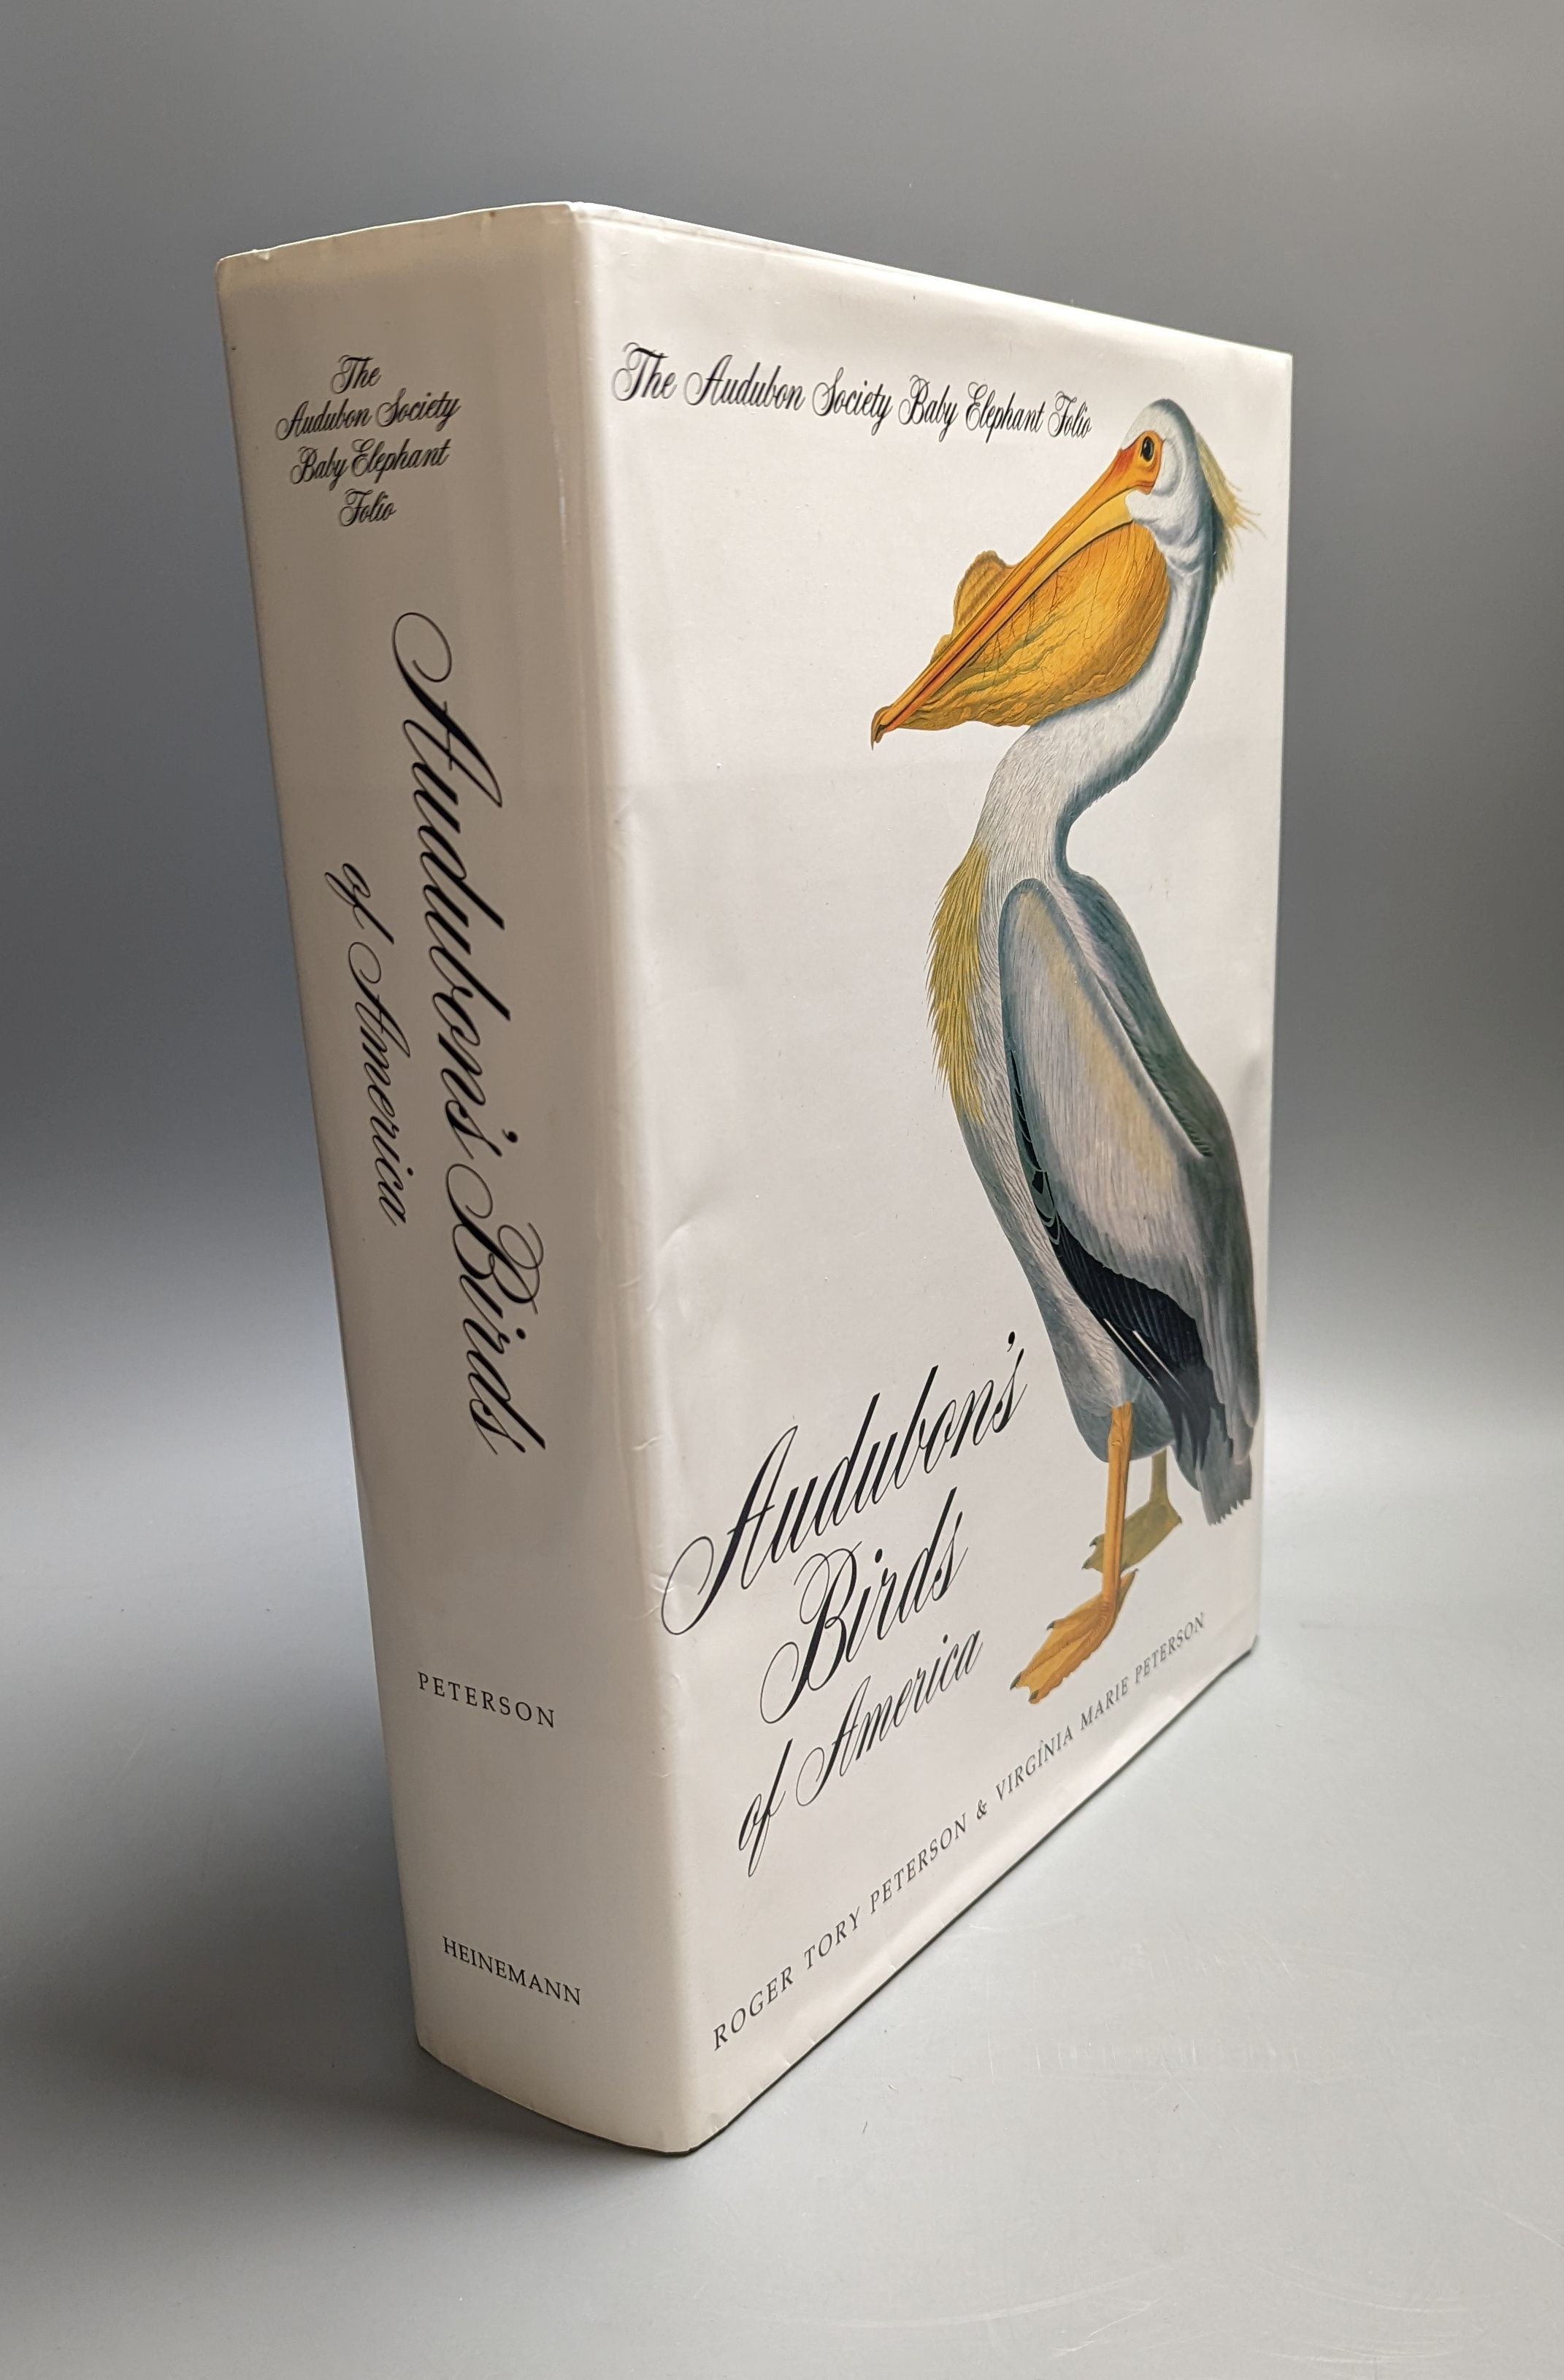 The Audubon Society baby elephant folio ‘Audubons Birds of America’ by Roger Tory Peterson and Virginia Marie Peterson